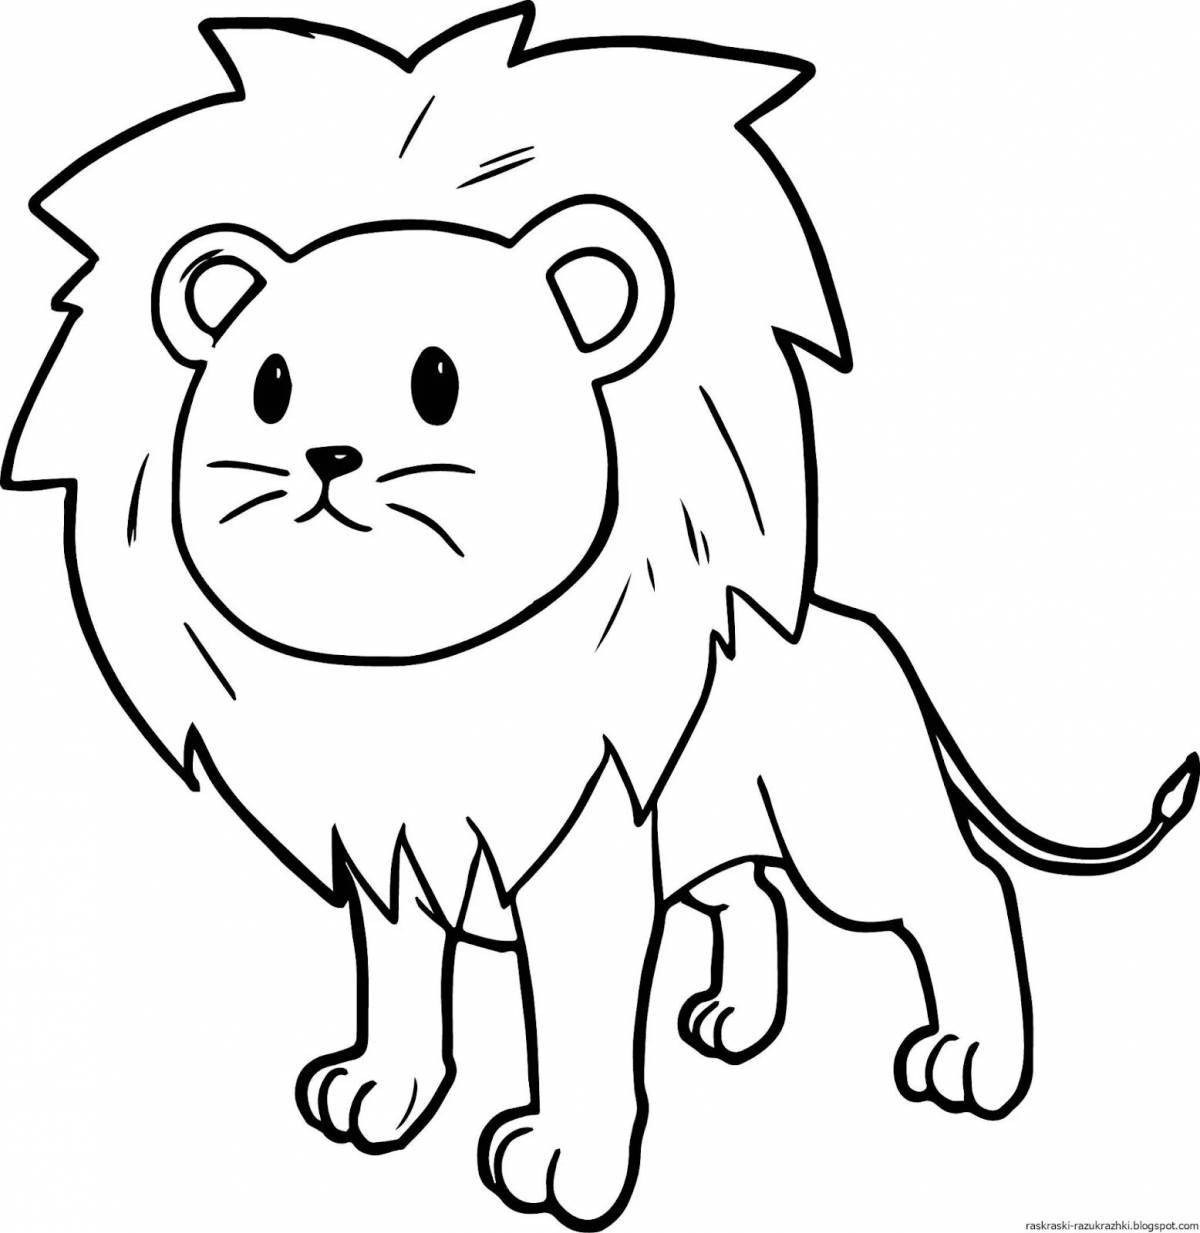 Shiny lion coloring book for kids